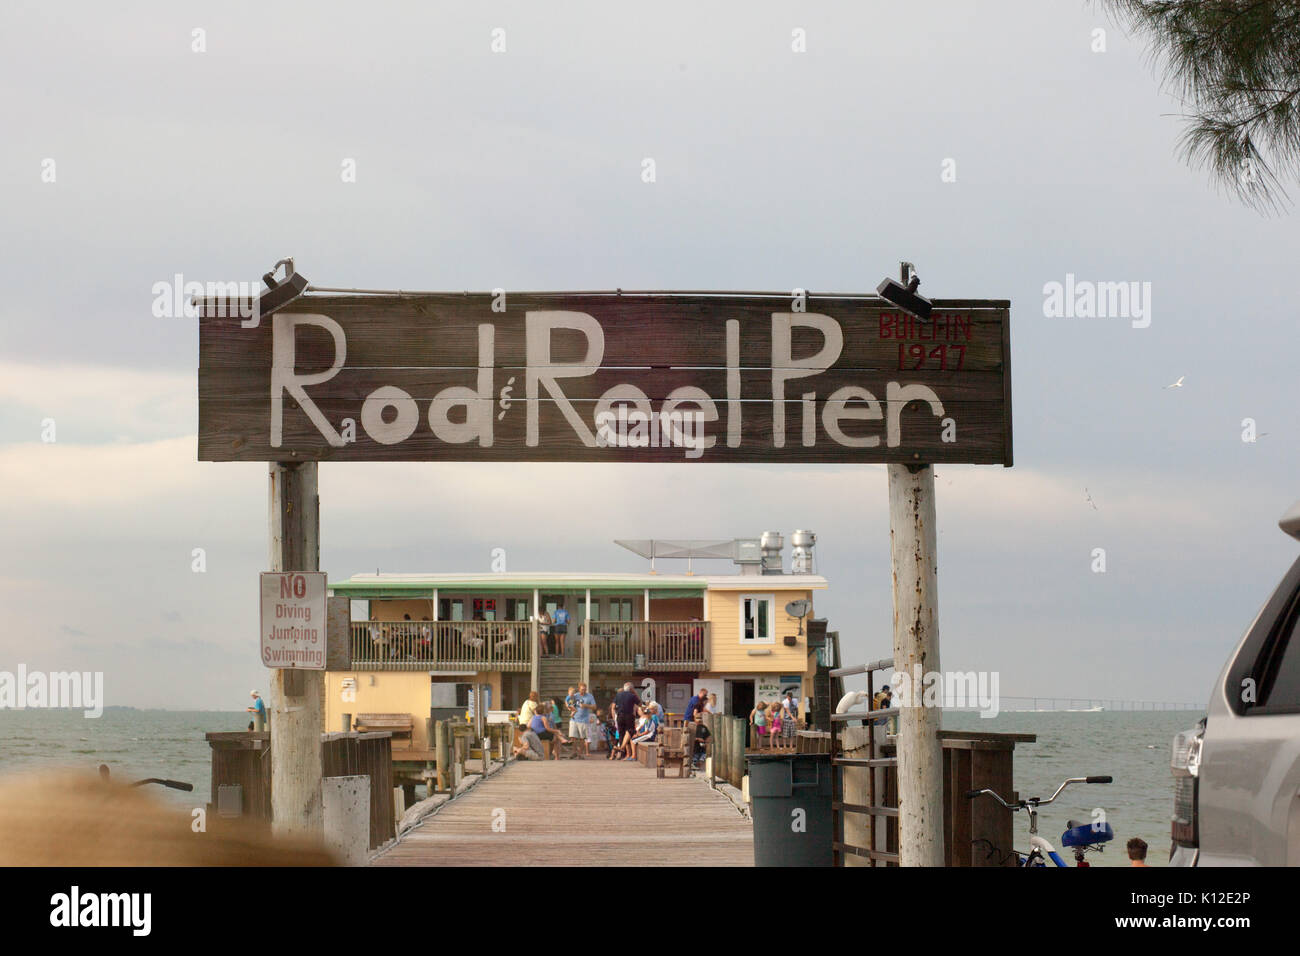 Rod and Reel Pier and restaurant on Anna Maria Island, Florida. Stock Photo